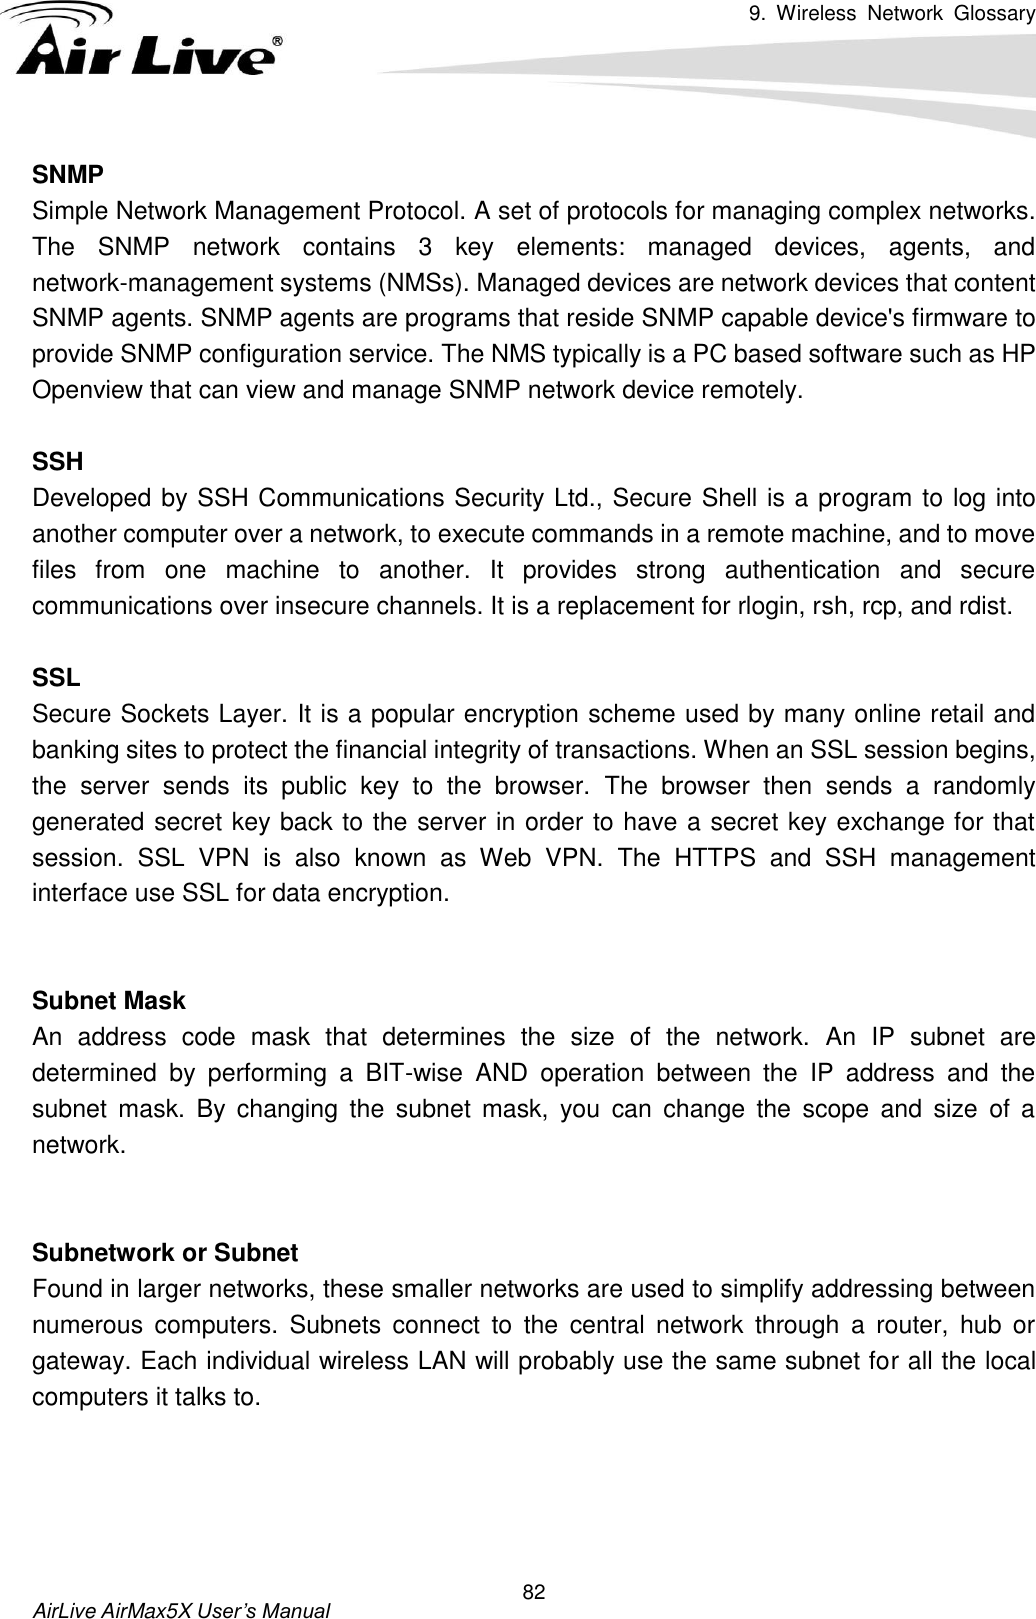 9.  Wireless  Network  Glossary       AirLive AirMax5X User’s Manual 82 SNMP Simple Network Management Protocol. A set of protocols for managing complex networks.   The  SNMP  network  contains  3  key  elements:  managed  devices,  agents,  and network-management systems (NMSs). Managed devices are network devices that content SNMP agents. SNMP agents are programs that reside SNMP capable device&apos;s firmware to provide SNMP configuration service. The NMS typically is a PC based software such as HP Openview that can view and manage SNMP network device remotely.  SSH Developed by SSH Communications Security Ltd., Secure Shell is a program to log into another computer over a network, to execute commands in a remote machine, and to move files  from  one  machine  to  another.  It  provides  strong  authentication  and  secure communications over insecure channels. It is a replacement for rlogin, rsh, rcp, and rdist.  SSL Secure Sockets Layer. It is a popular encryption scheme used by many online retail and banking sites to protect the financial integrity of transactions. When an SSL session begins, the  server  sends  its  public  key  to  the  browser.  The  browser  then  sends  a  randomly generated secret key back to the server in order to have a secret key exchange for that session.  SSL  VPN  is  also  known  as  Web  VPN.  The  HTTPS  and  SSH  management interface use SSL for data encryption.   Subnet Mask An  address  code  mask  that  determines  the  size  of  the  network.  An  IP  subnet  are determined  by  performing  a  BIT-wise  AND  operation  between  the  IP  address  and  the subnet  mask.  By  changing  the  subnet  mask,  you  can  change  the  scope  and  size  of  a network.     Subnetwork or Subnet Found in larger networks, these smaller networks are used to simplify addressing between numerous  computers.  Subnets  connect  to  the  central  network  through  a  router,  hub  or gateway. Each individual wireless LAN will probably use the same subnet for all the local computers it talks to.     